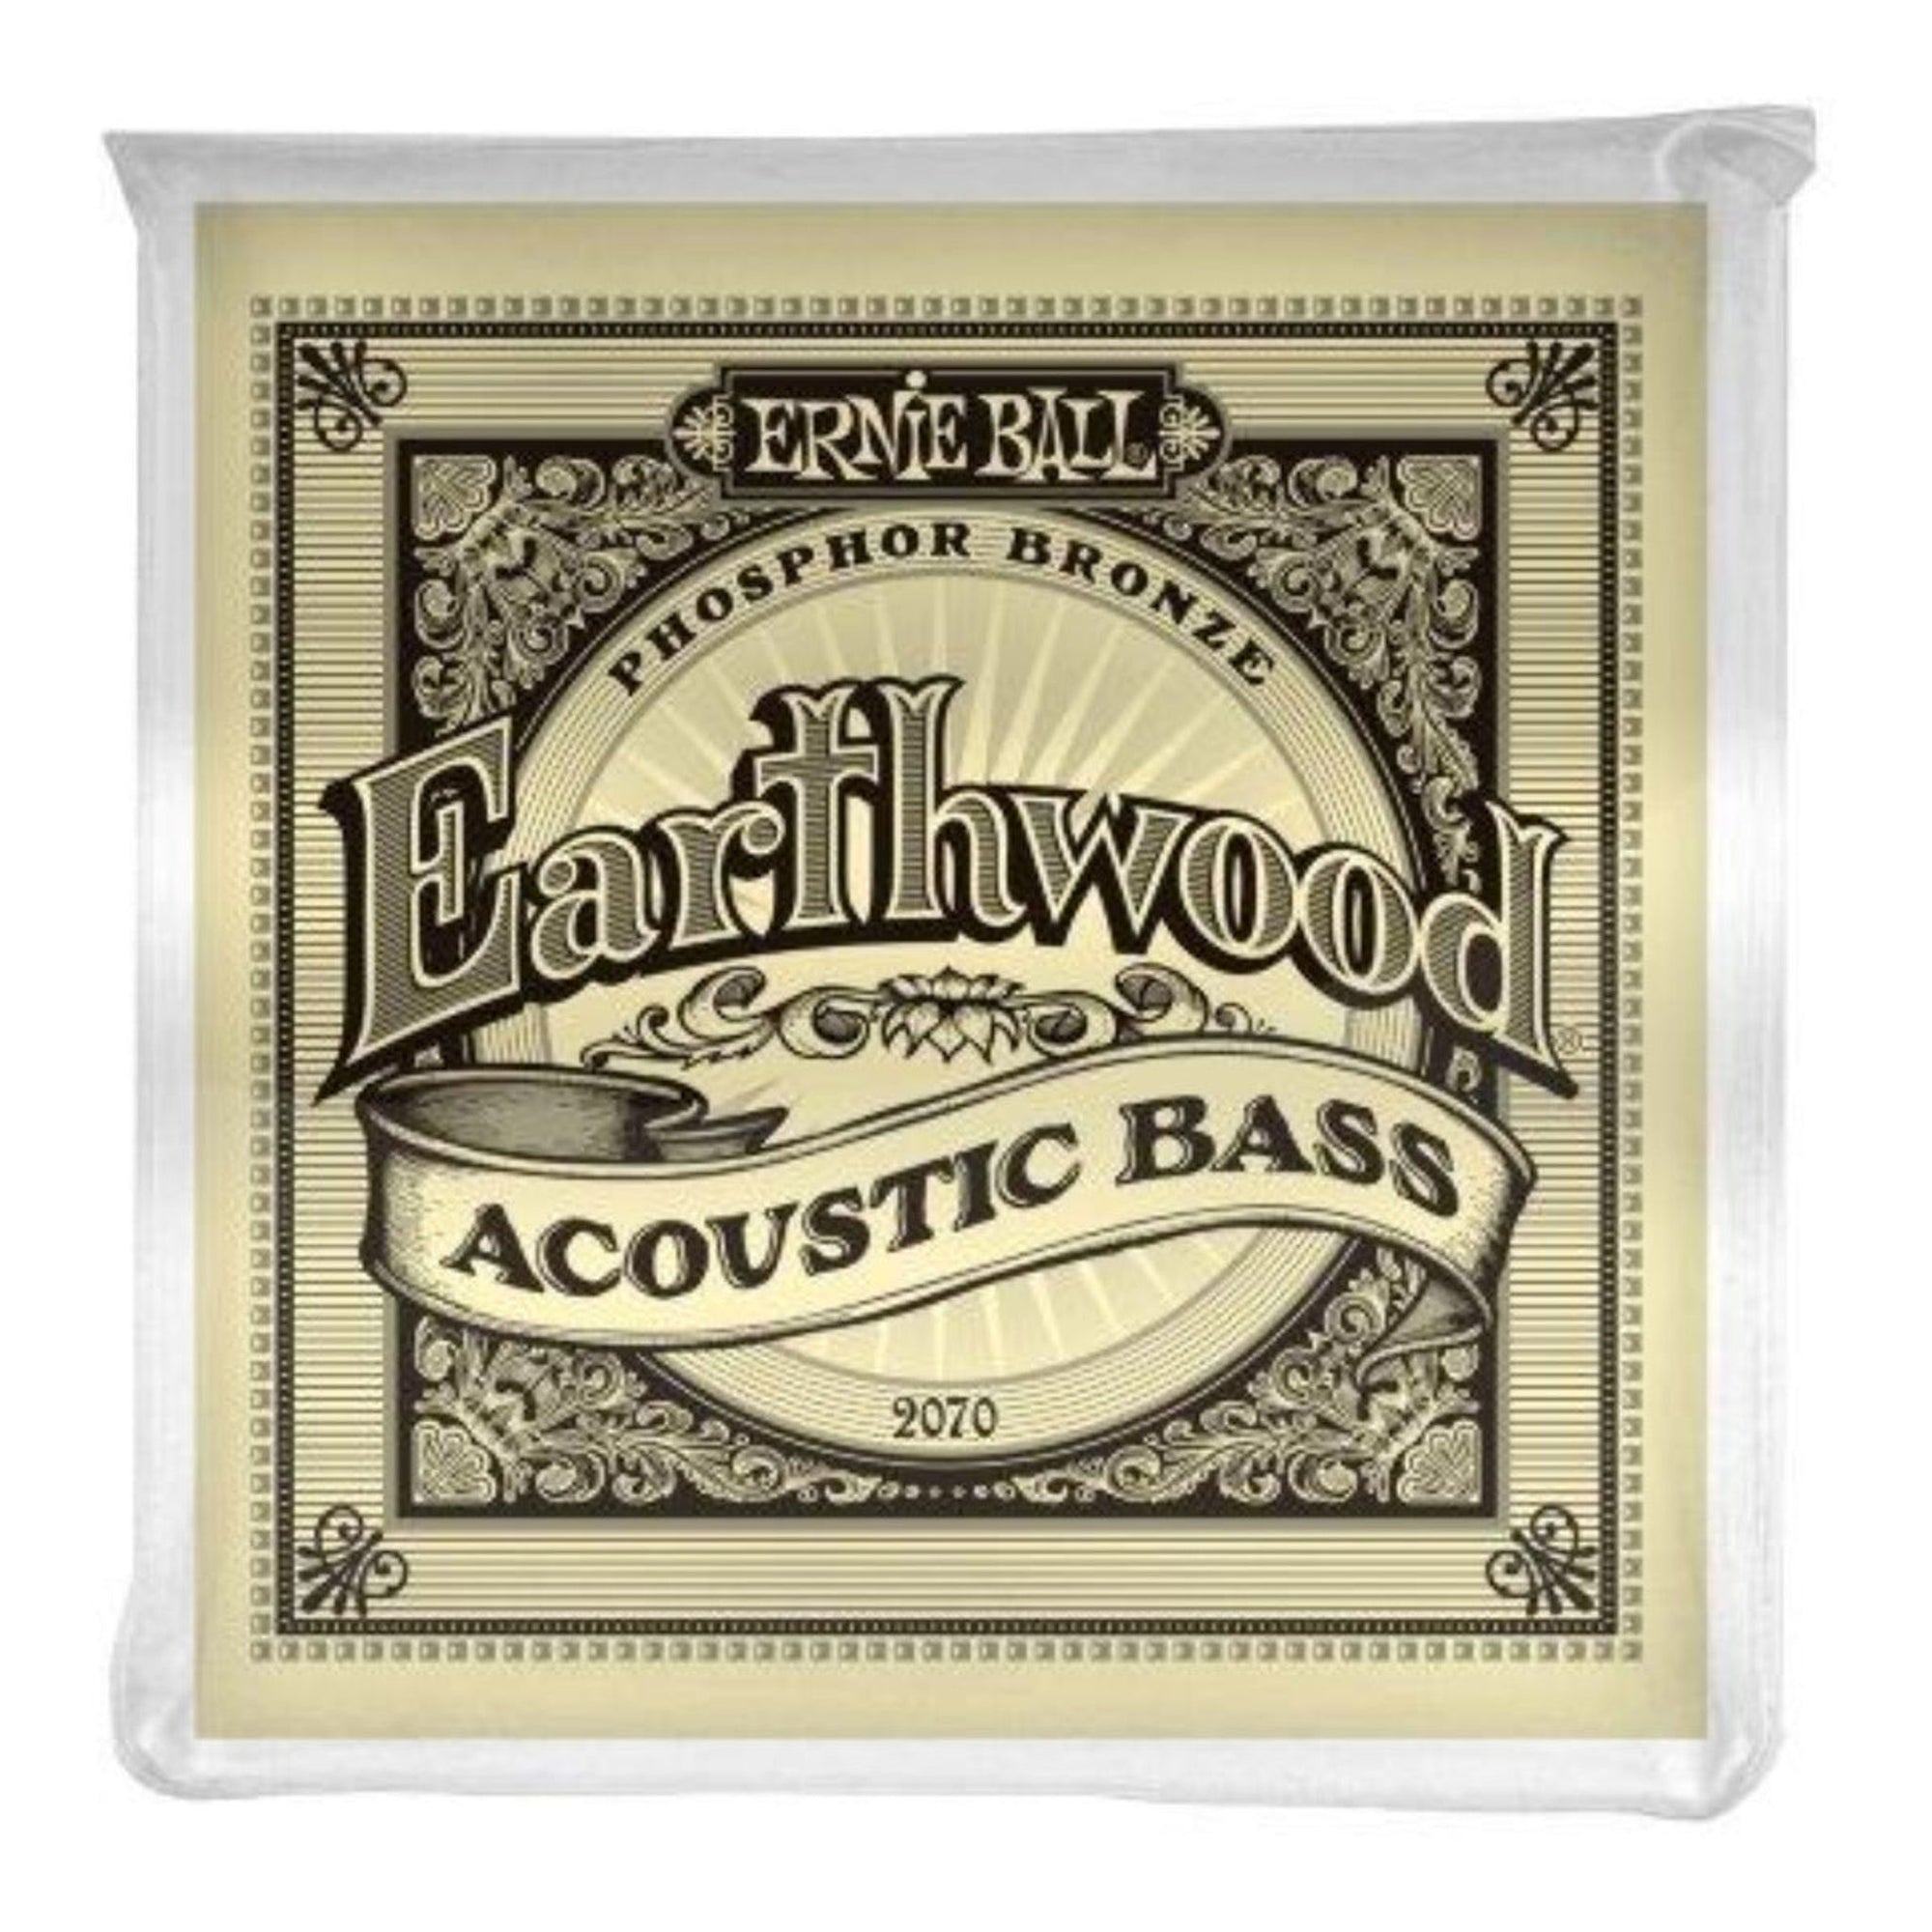 Ernie Ball Earthwood Phosphor Bronze acoustic bass strings are made from 92% copper, 7.7% tin, 0.3% phosphorus wire wrapped around tin plated hex shaped steel core wire. These acoustic bass guitar strings have a light orange, gold colour and provide a mellow, ringing sound, with excellent clarity. 